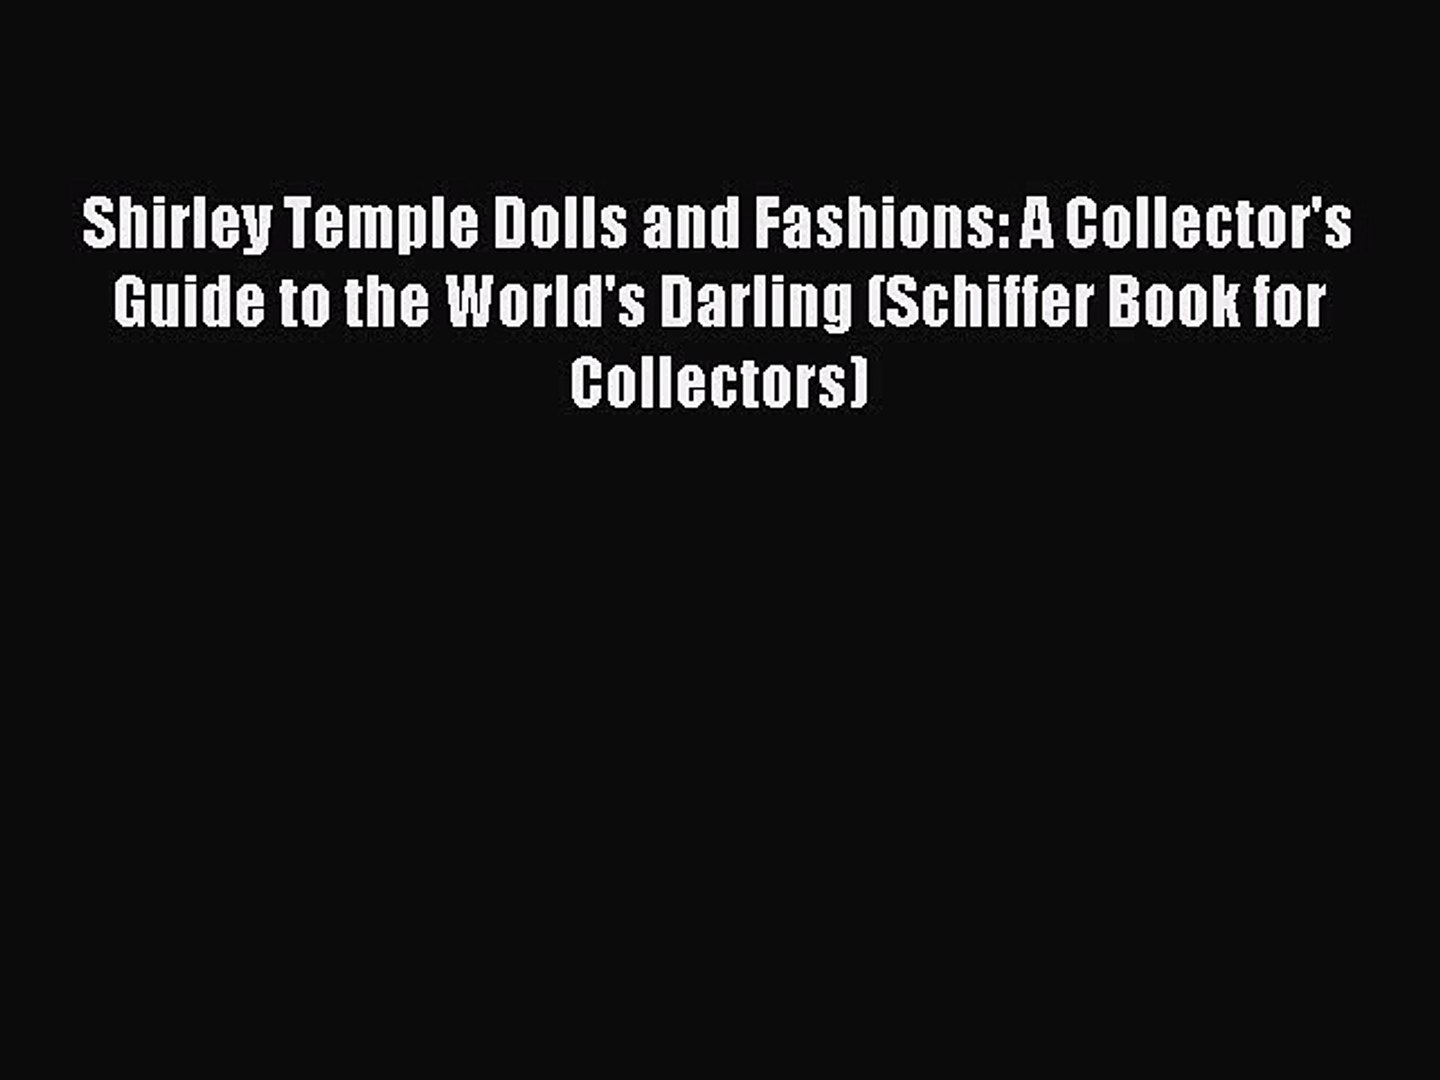 Read Shirley Temple Dolls and Fashions: A Collector's Guide to the World's Darling (Schiff